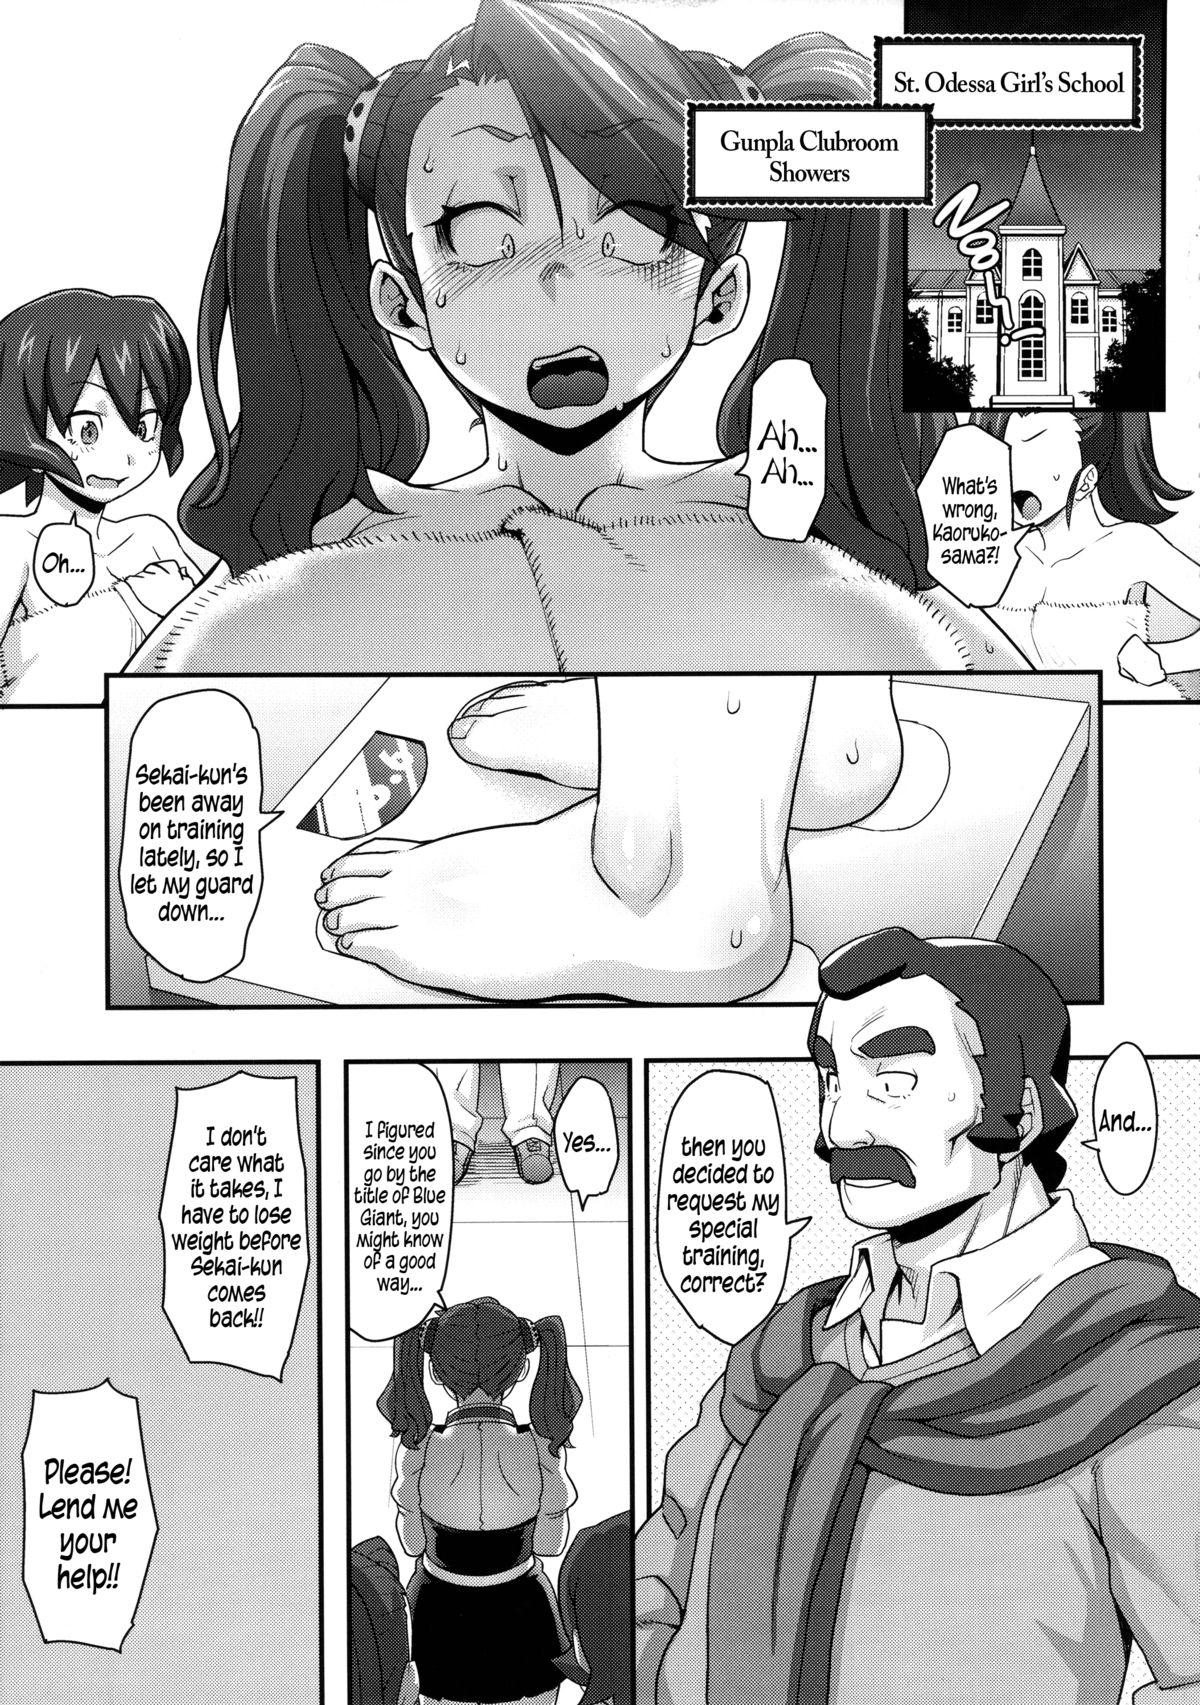 Assfingering SHIRITSUBO | ASSVASE - Gundam build fighters try Amador - Page 3